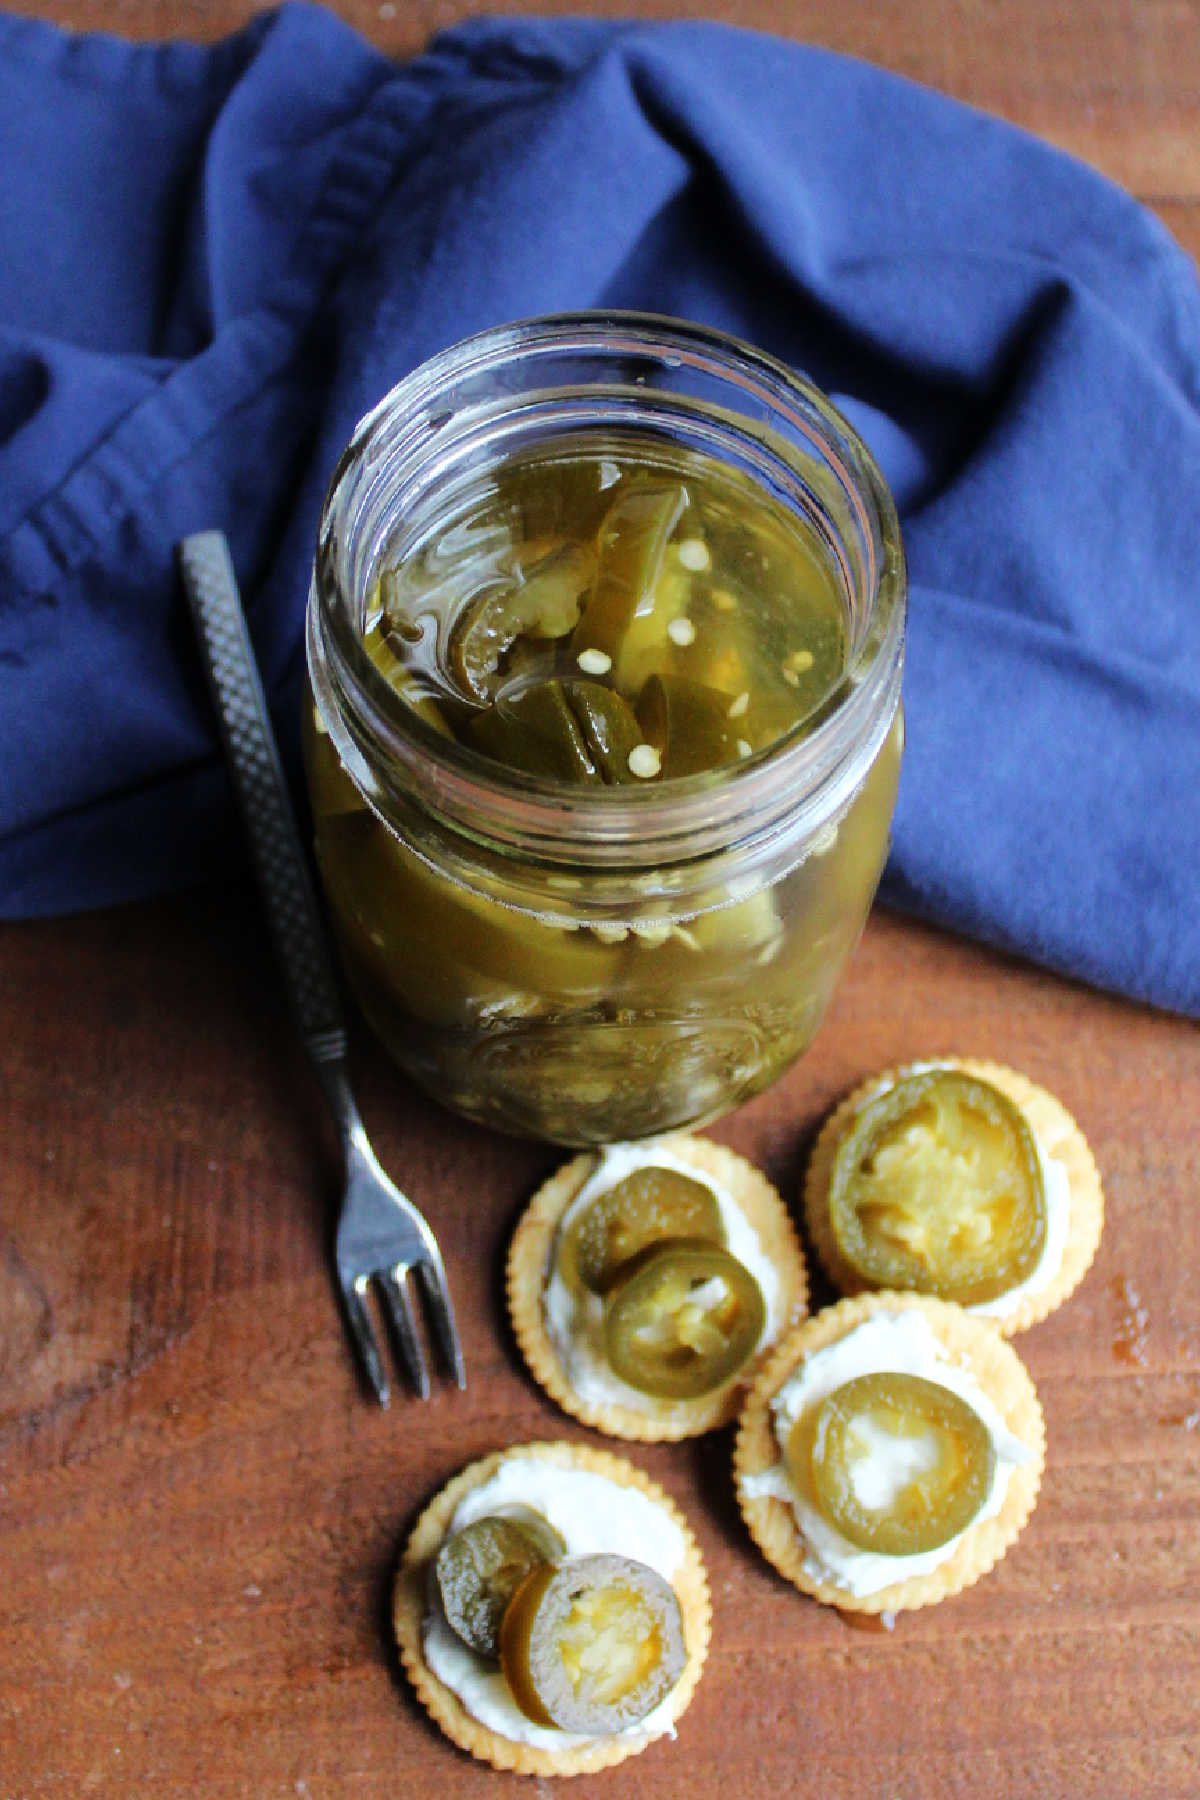 Looking down on a jar of cowboy candy next to crackers topped with cream cheese and candied jalapeno rings.